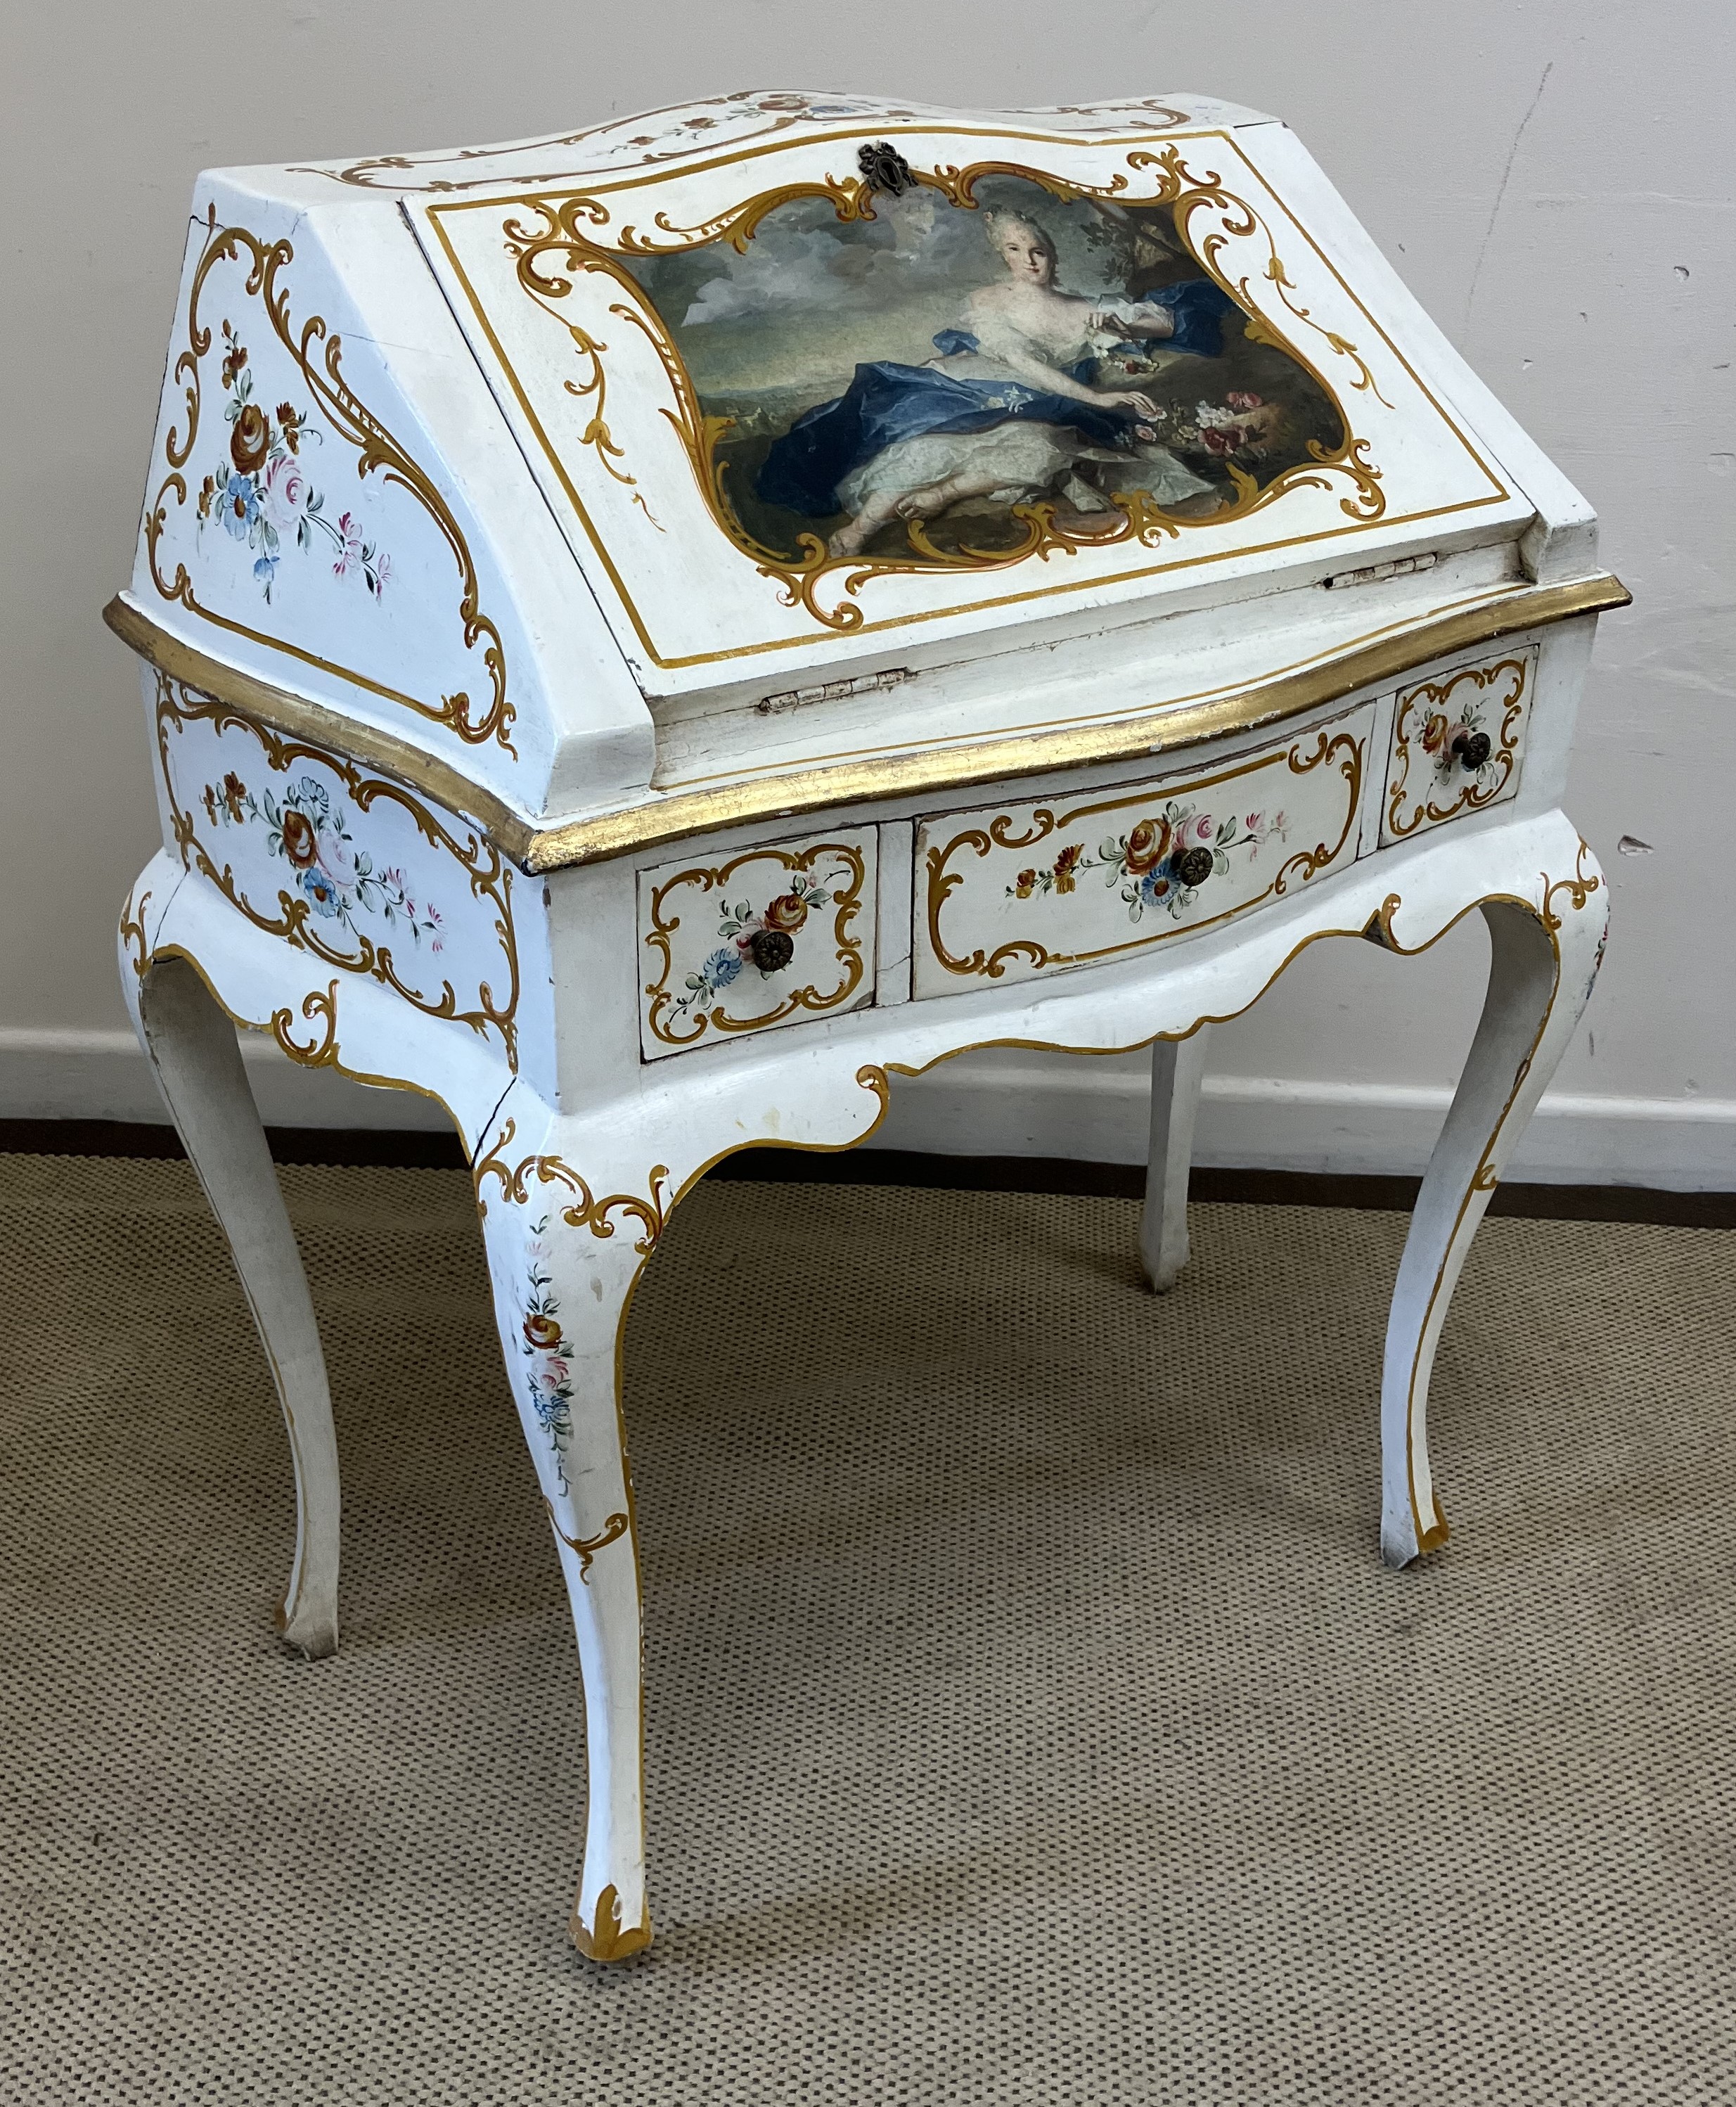 A 20th Century painted bureau de dame in the 18th Century style,